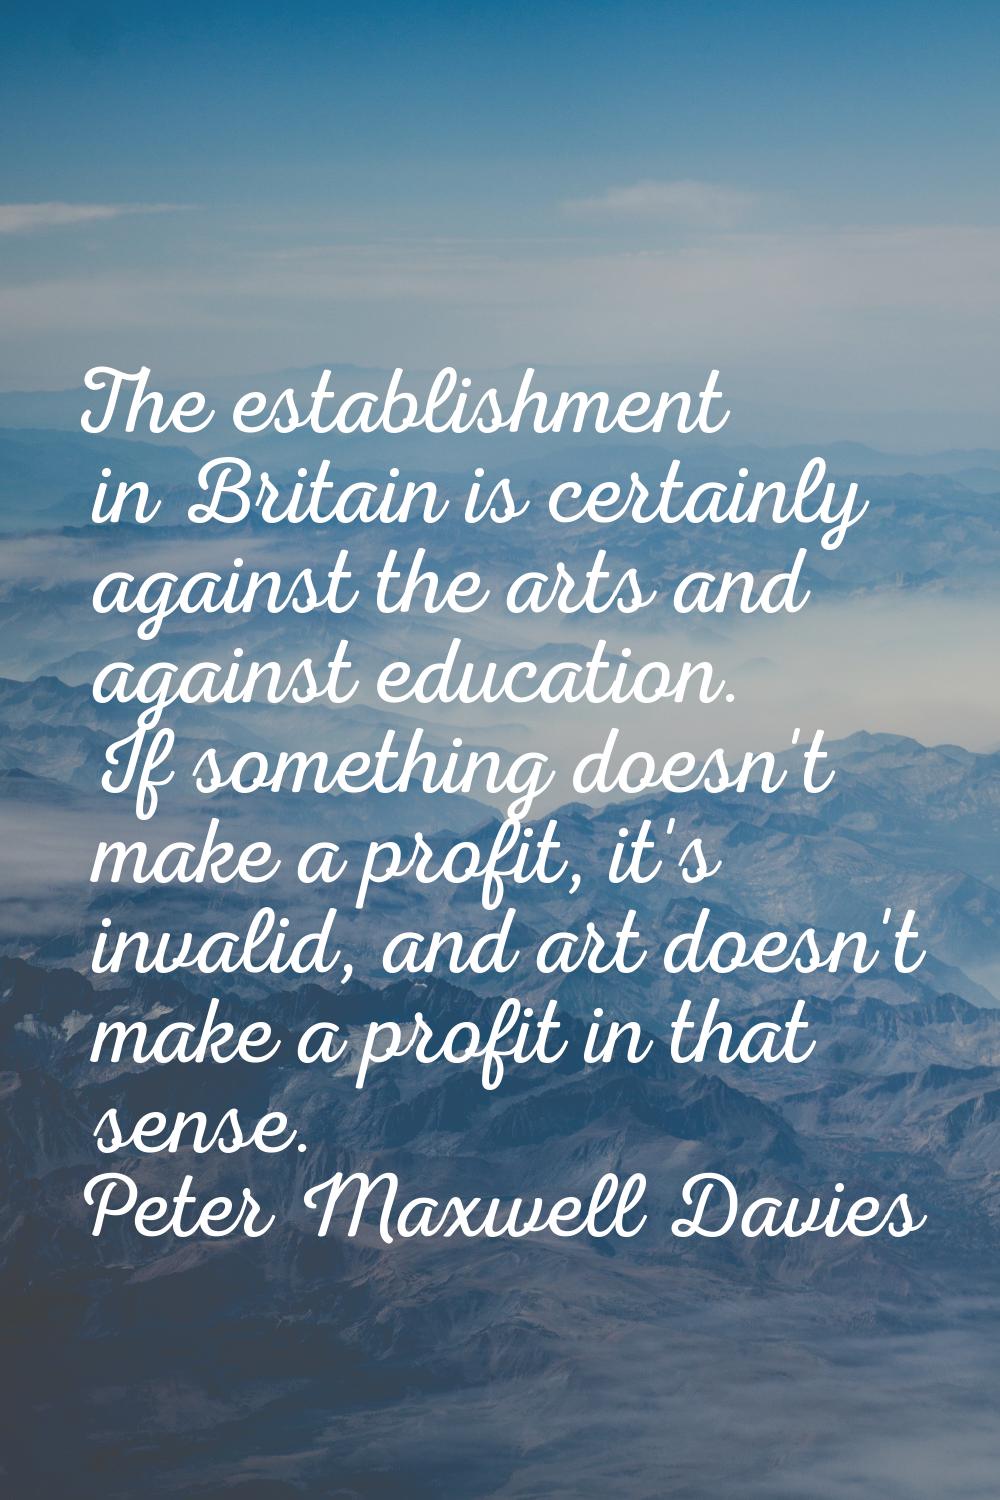 The establishment in Britain is certainly against the arts and against education. If something does